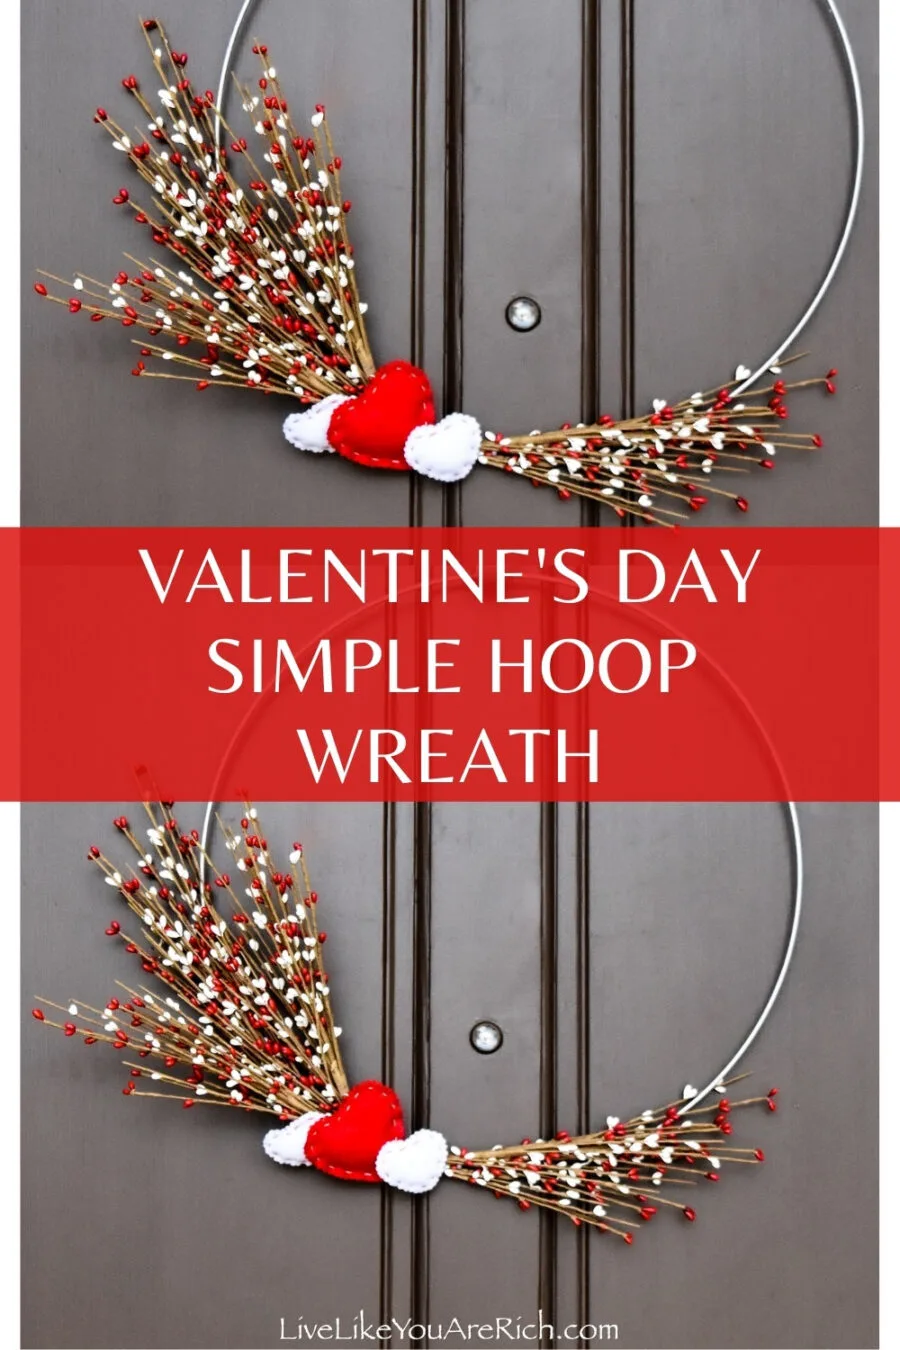 DIY Valentine’s Day Simple Hoop Wreath. A very easy and quick to make. Hang the wreath and step back and enjoy your Valentine’s Day Simple Hoop Wreath.